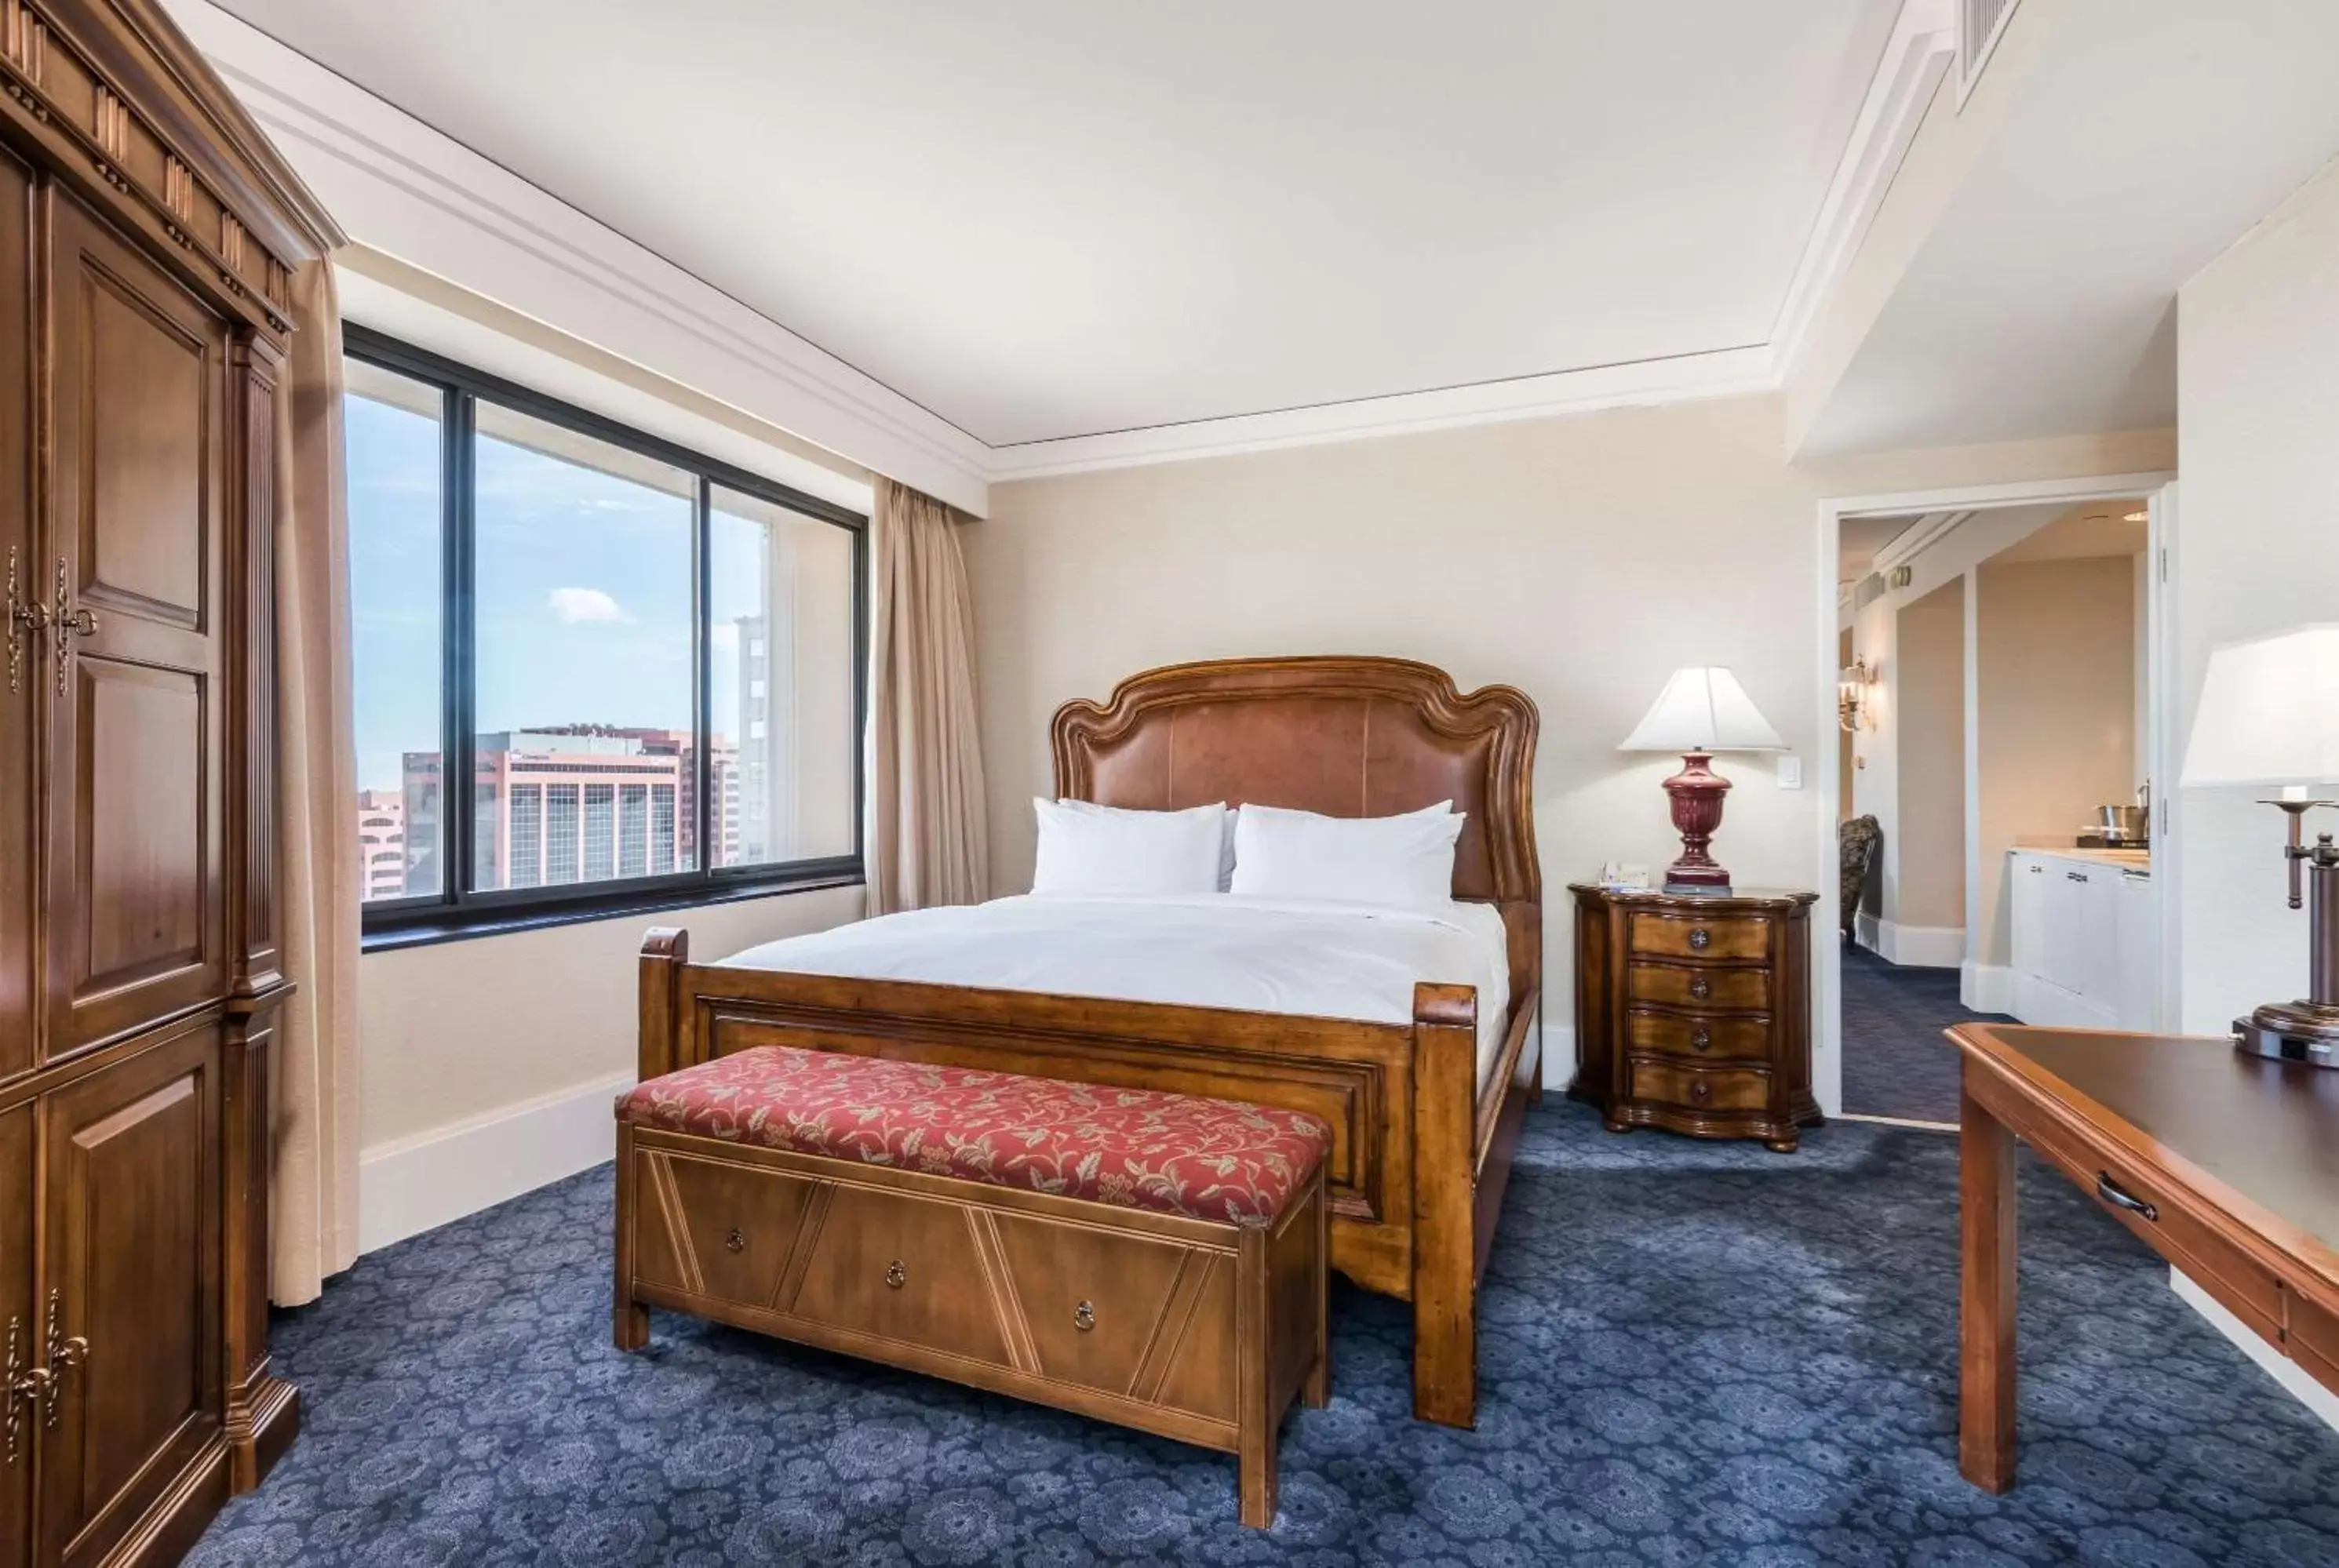 King Governors Suite with City View in The Antlers, A Wyndham Hotel